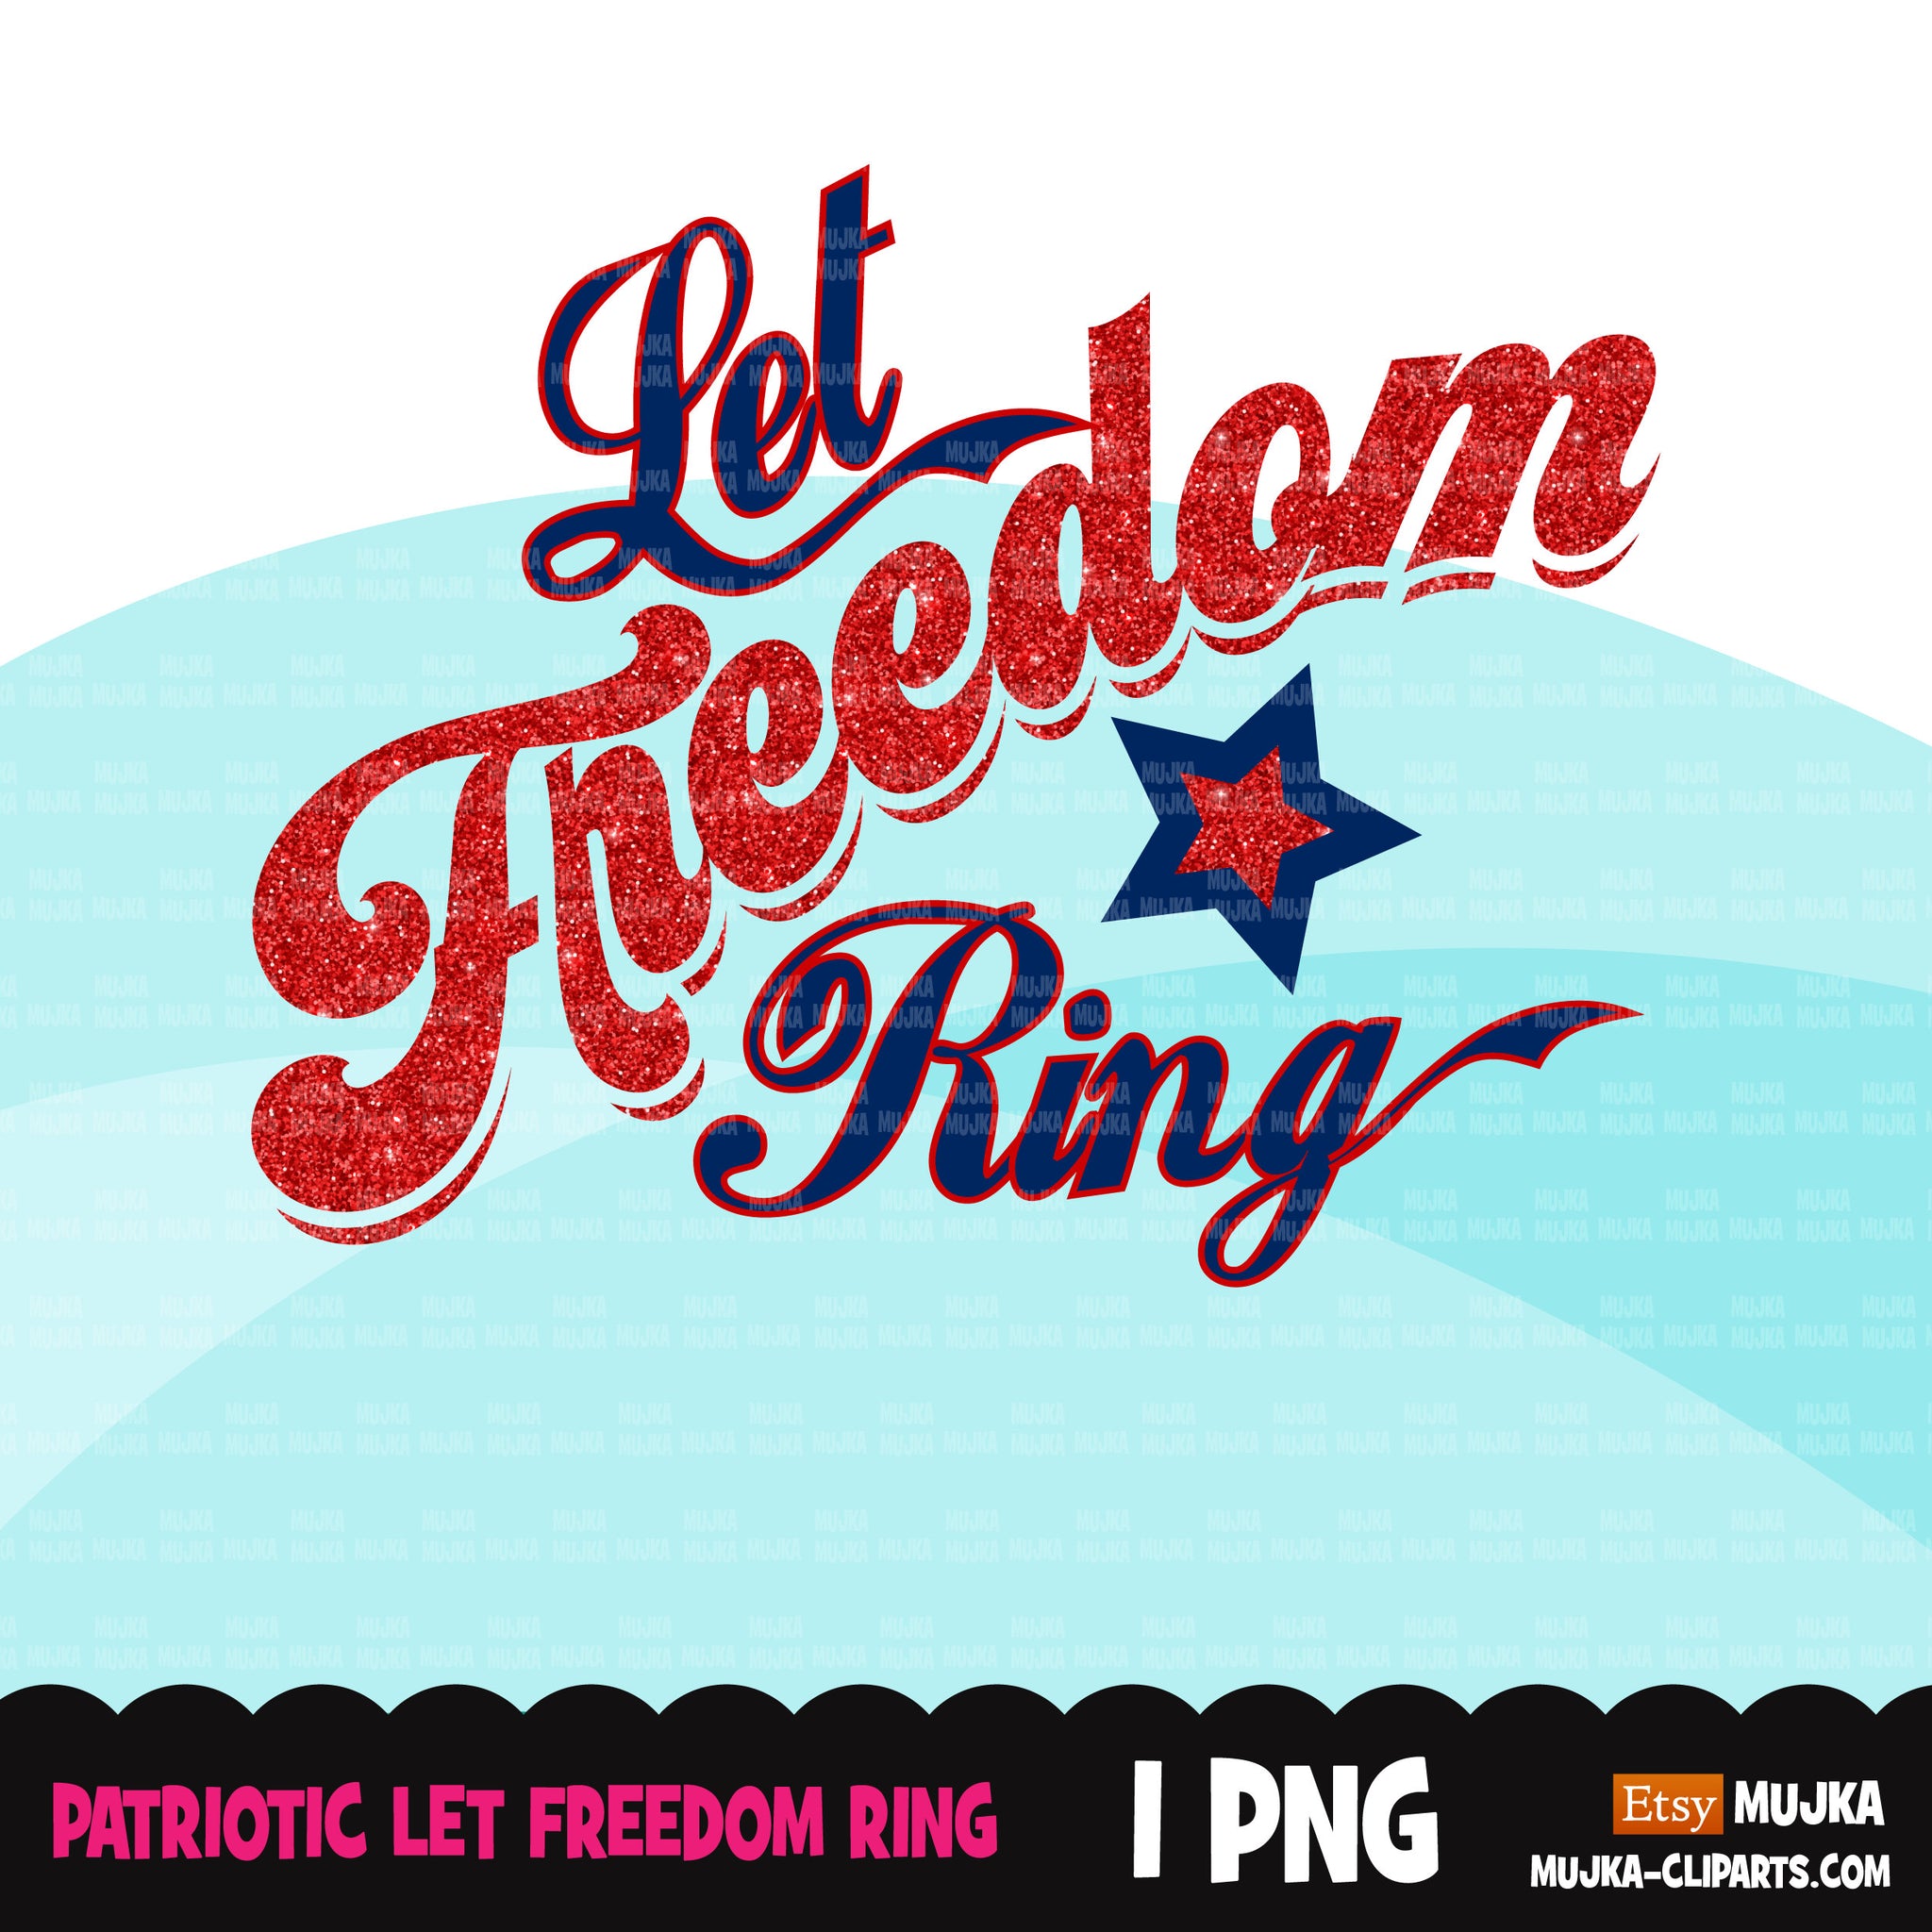 Veterans Day clipart, patriotic sublimation designs download, 4th of July, USA patriots, let freedom ring shirt, Martin Luther King quotes